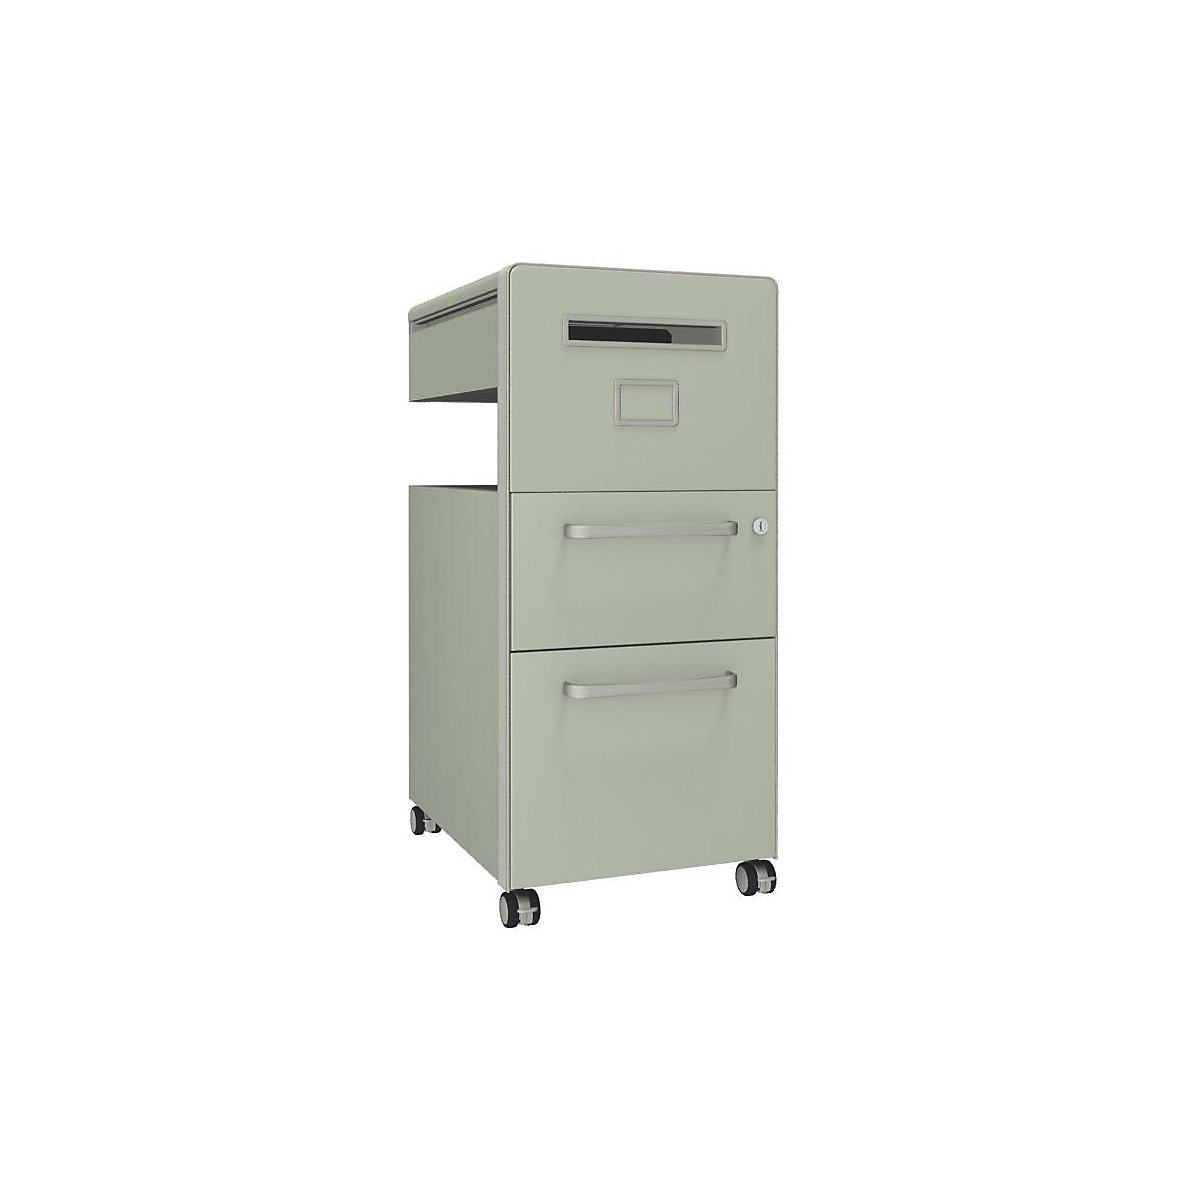 Bite™ pedestal furniture, with 1 whiteboard, opens on the right side – BISLEY, with 1 universal drawer, 1 suspension file drawer, portland-20